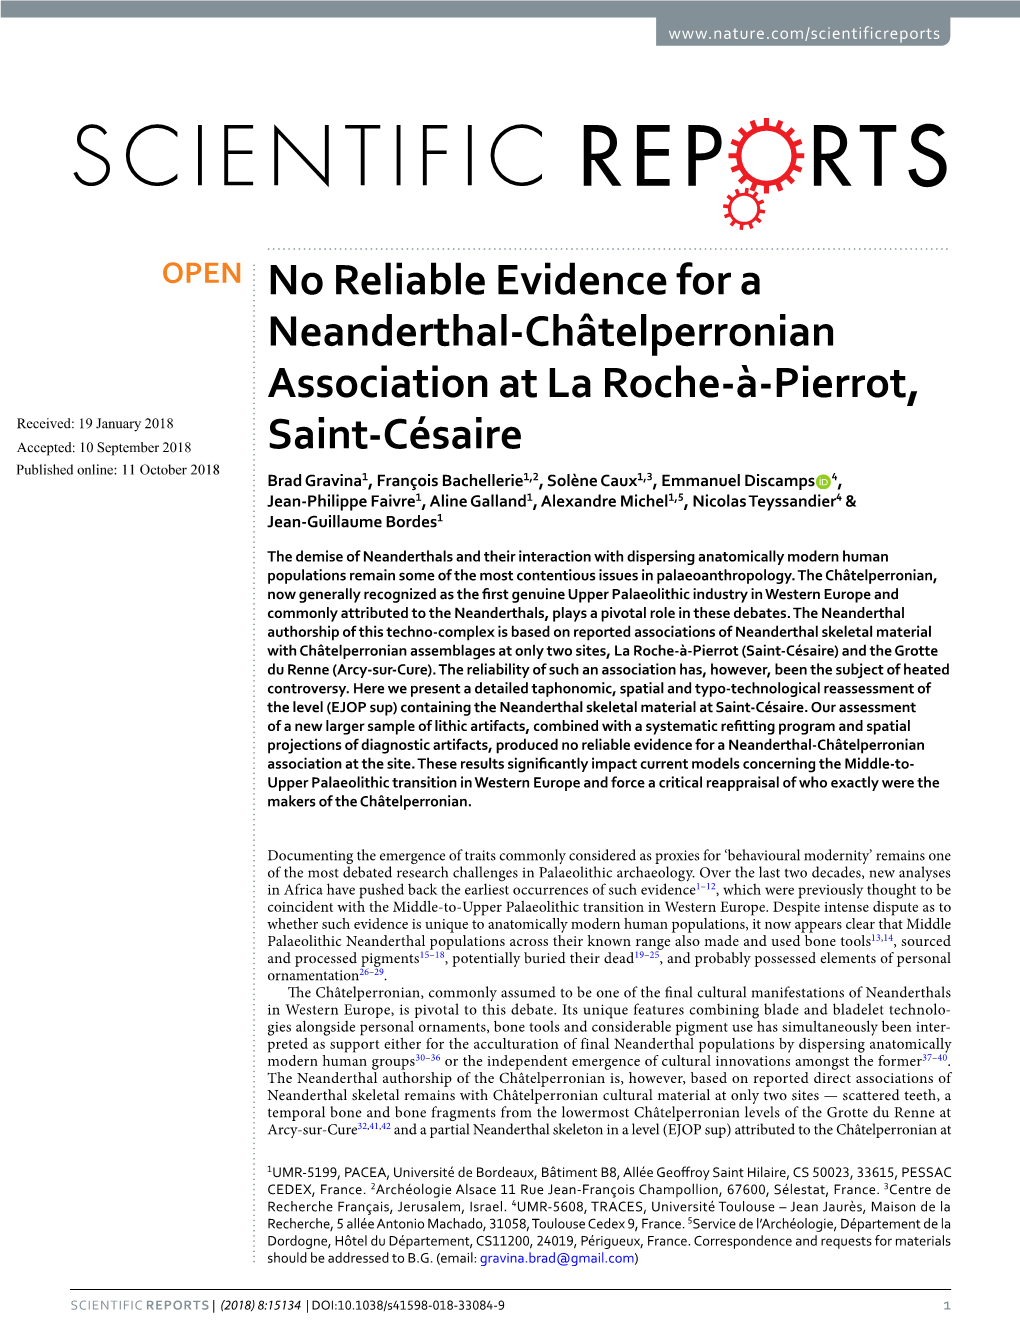 No Reliable Evidence for a Neanderthal-Châtelperronian